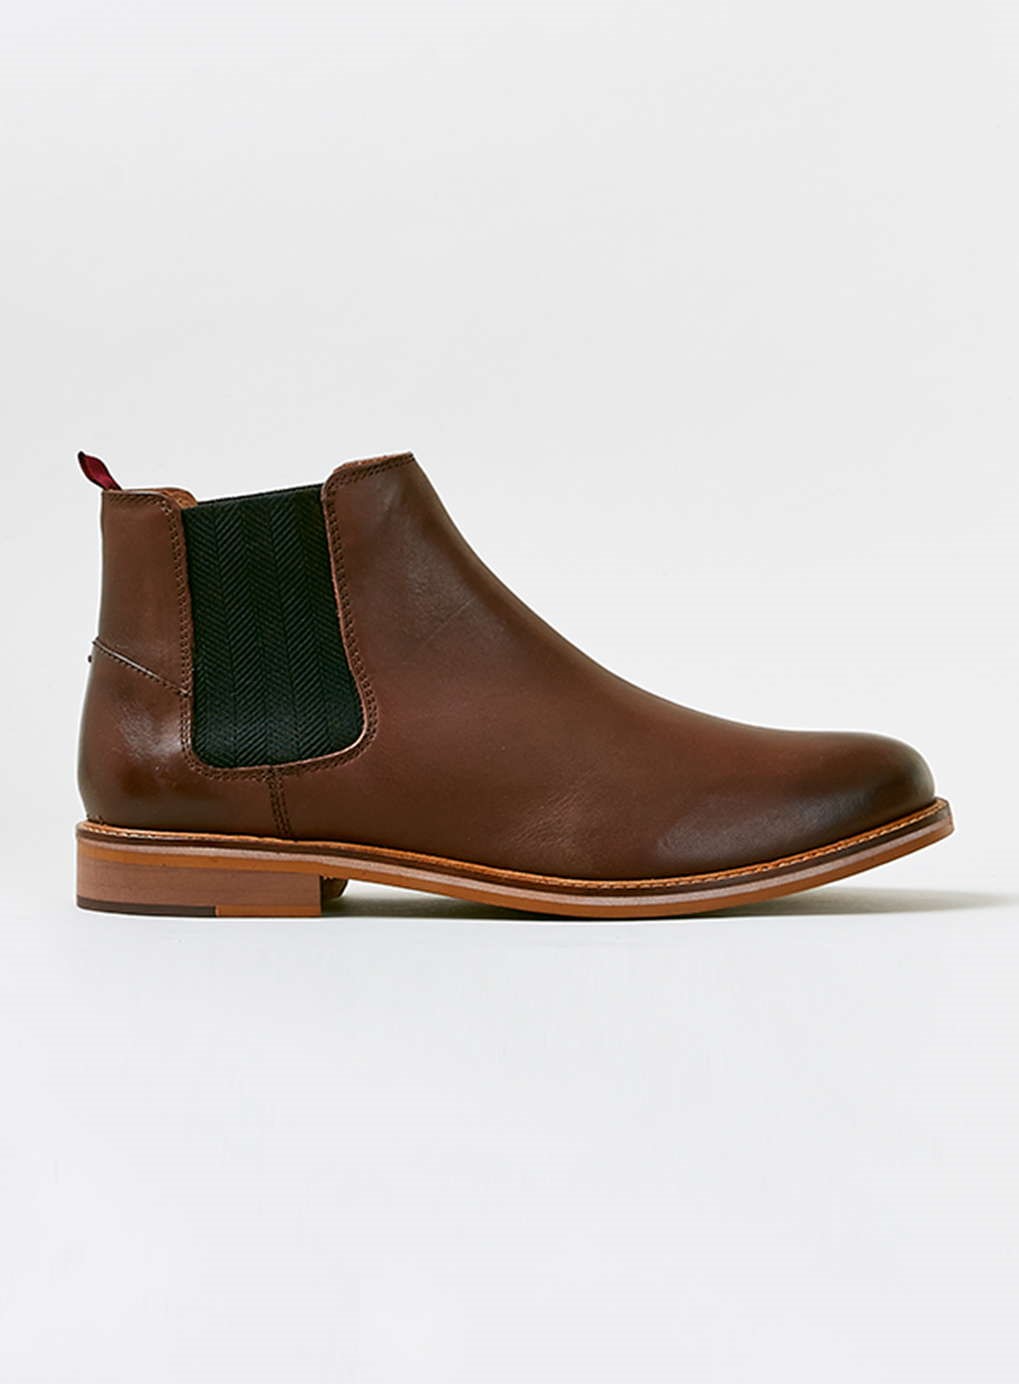 Ben Sherman Brown Leather Chelsea Boots, £90